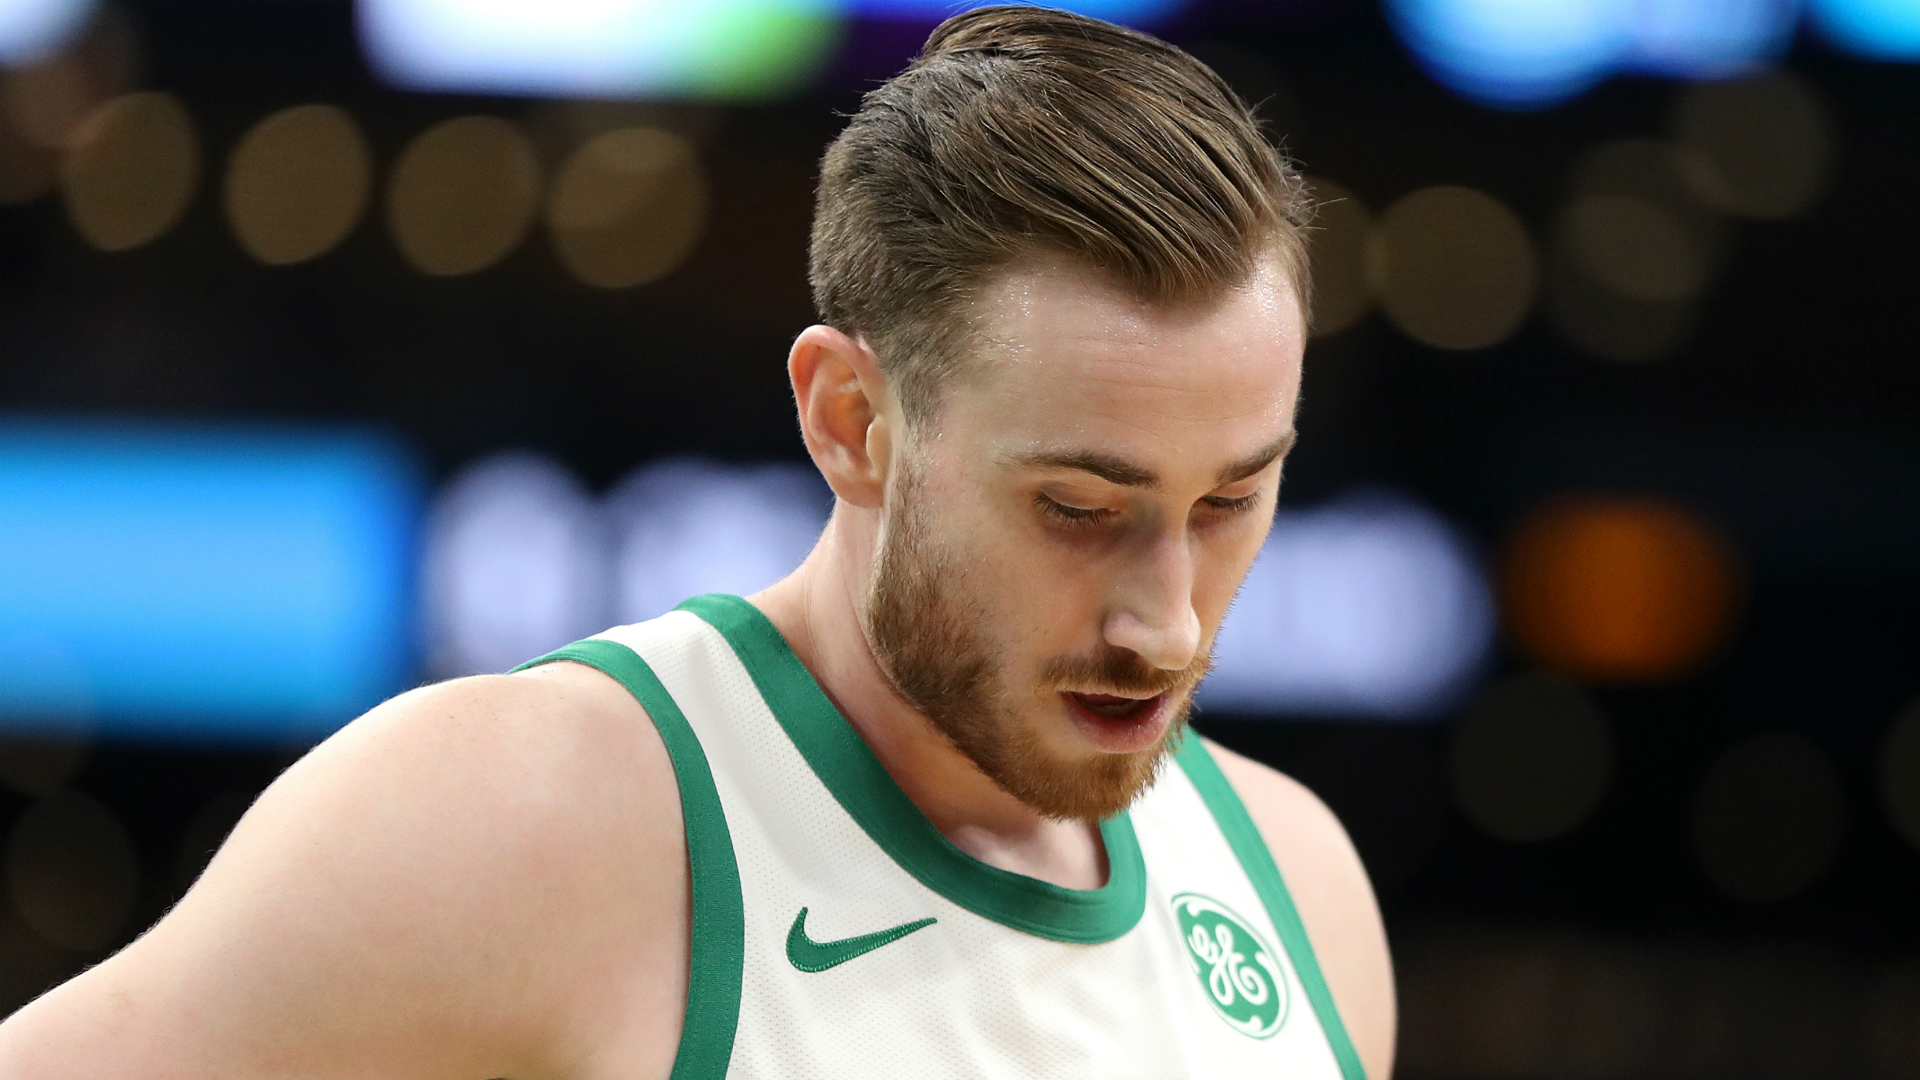 The Charlotte Hornets have bolstered their roster by signing Gordon Hayward on a four year deal, according to reports.